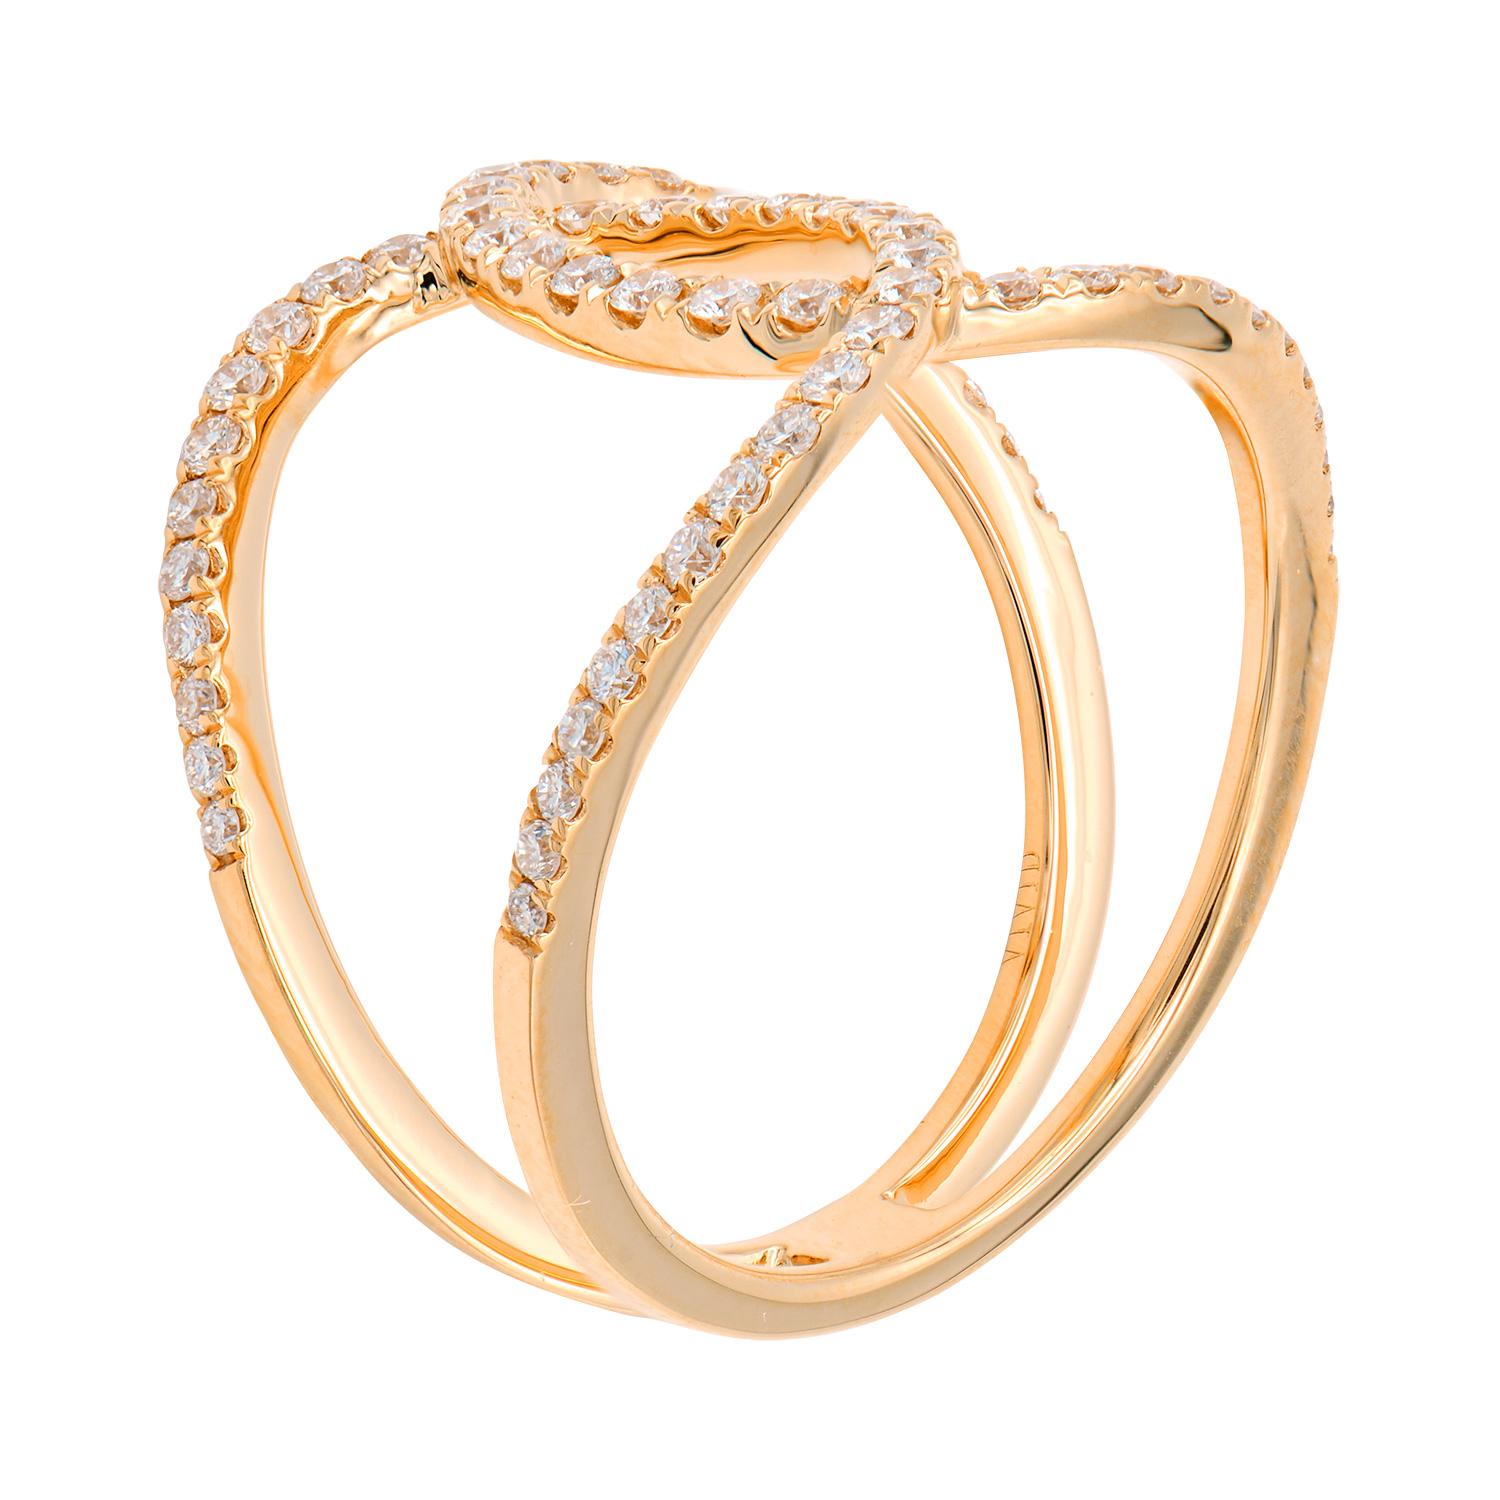 This beautiful fashionable ring appears as if two loops are overlapping each other to make a stunning design. This ring is size 6.5 and has 62 round VS2, G color diamonds totaling 0.47 carats which are set in 3.4 grams of 18 karat rose gold. 